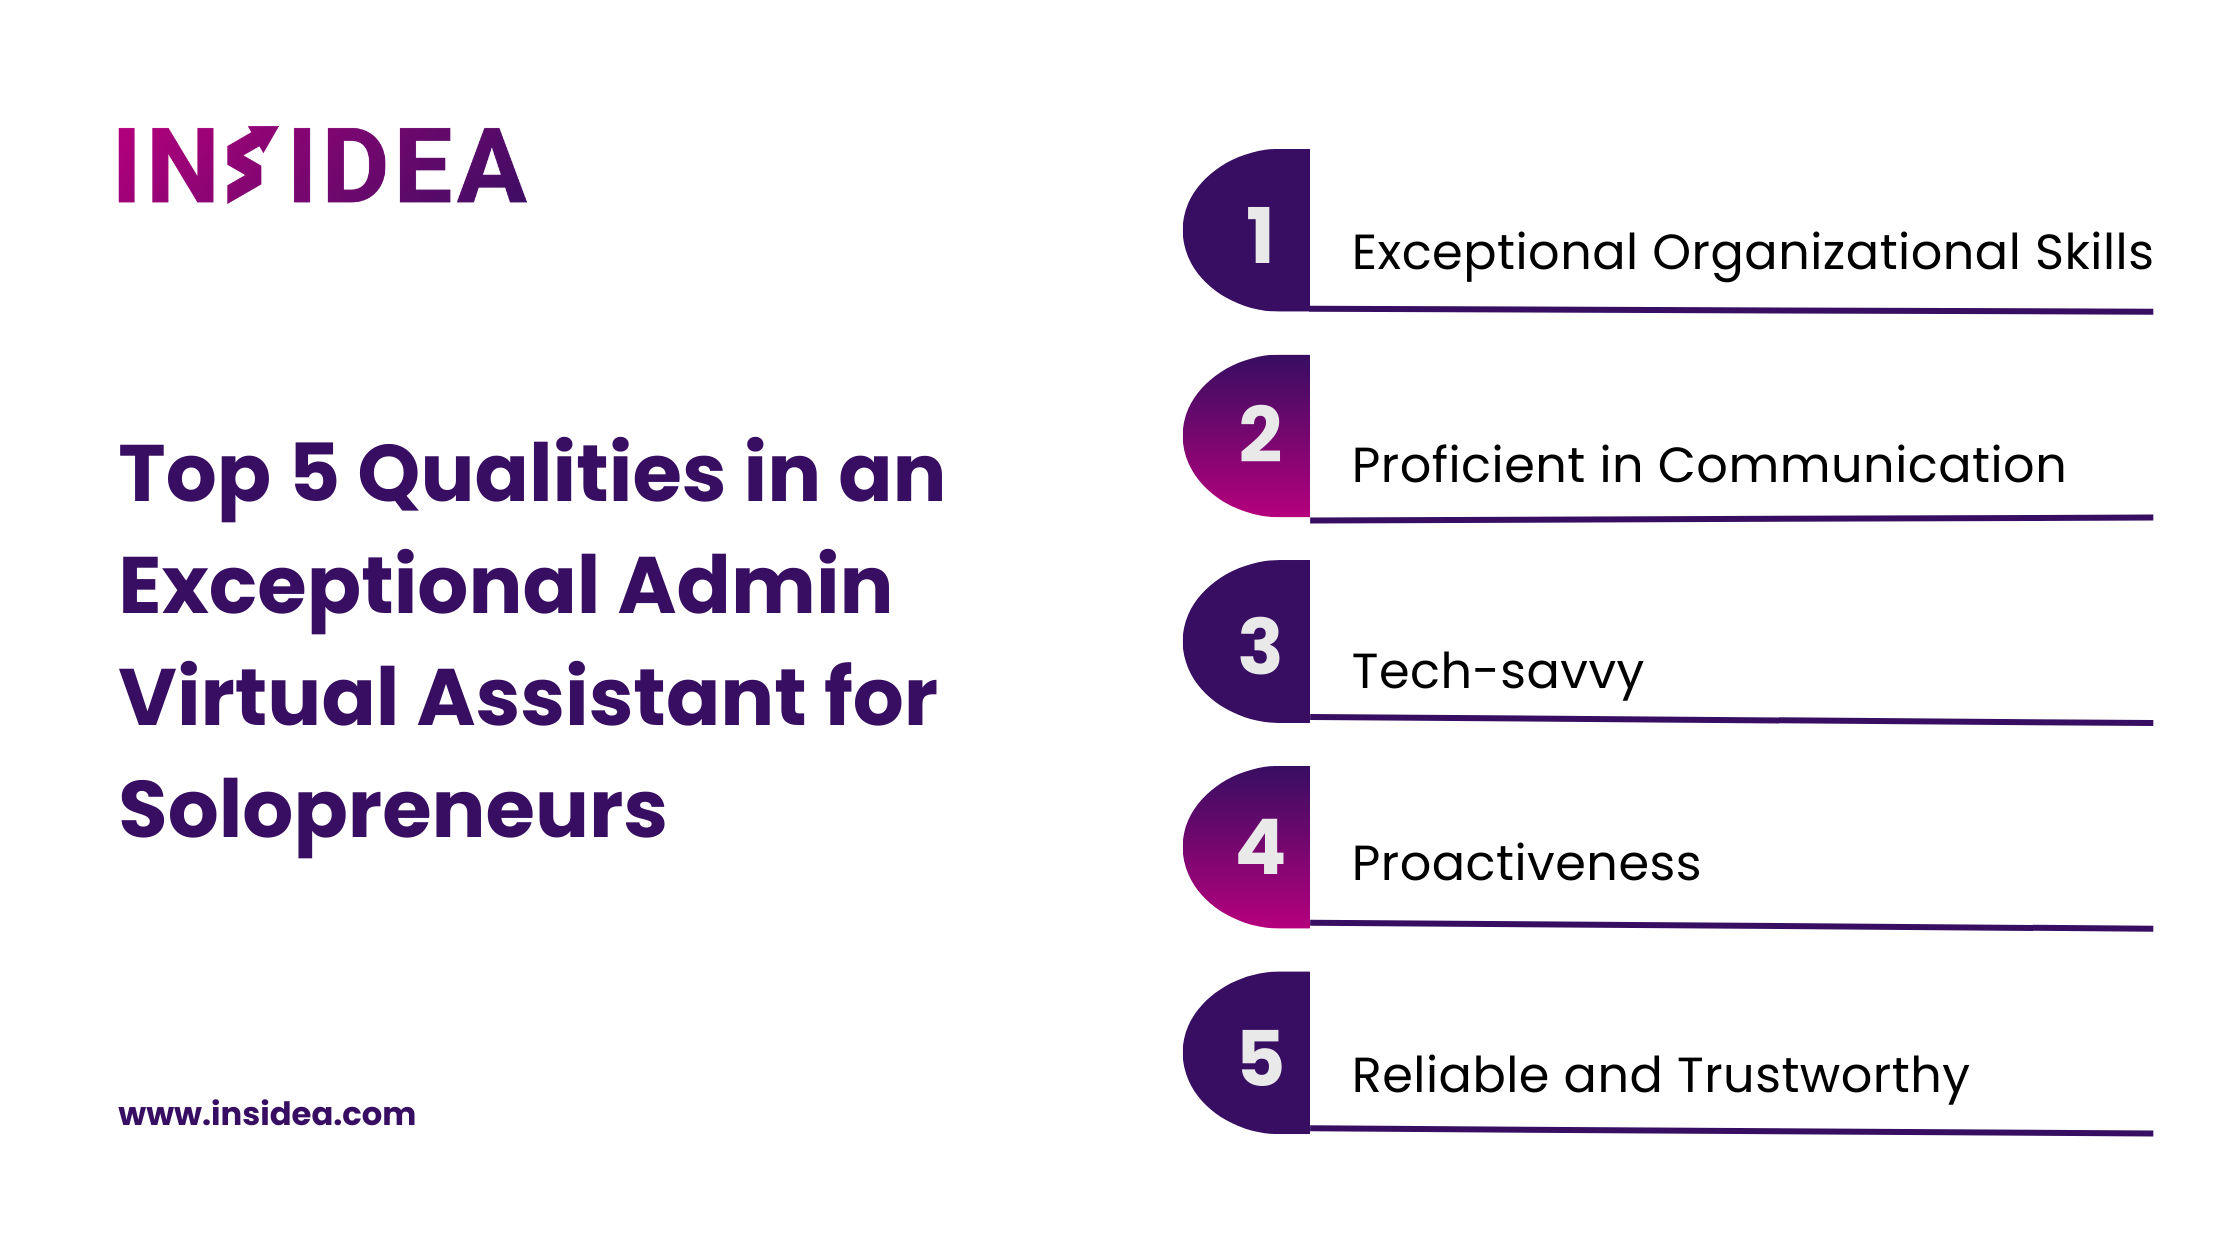 Top 5 Qualities in an Exceptional Admin Virtual Assistant for Solopreneurs